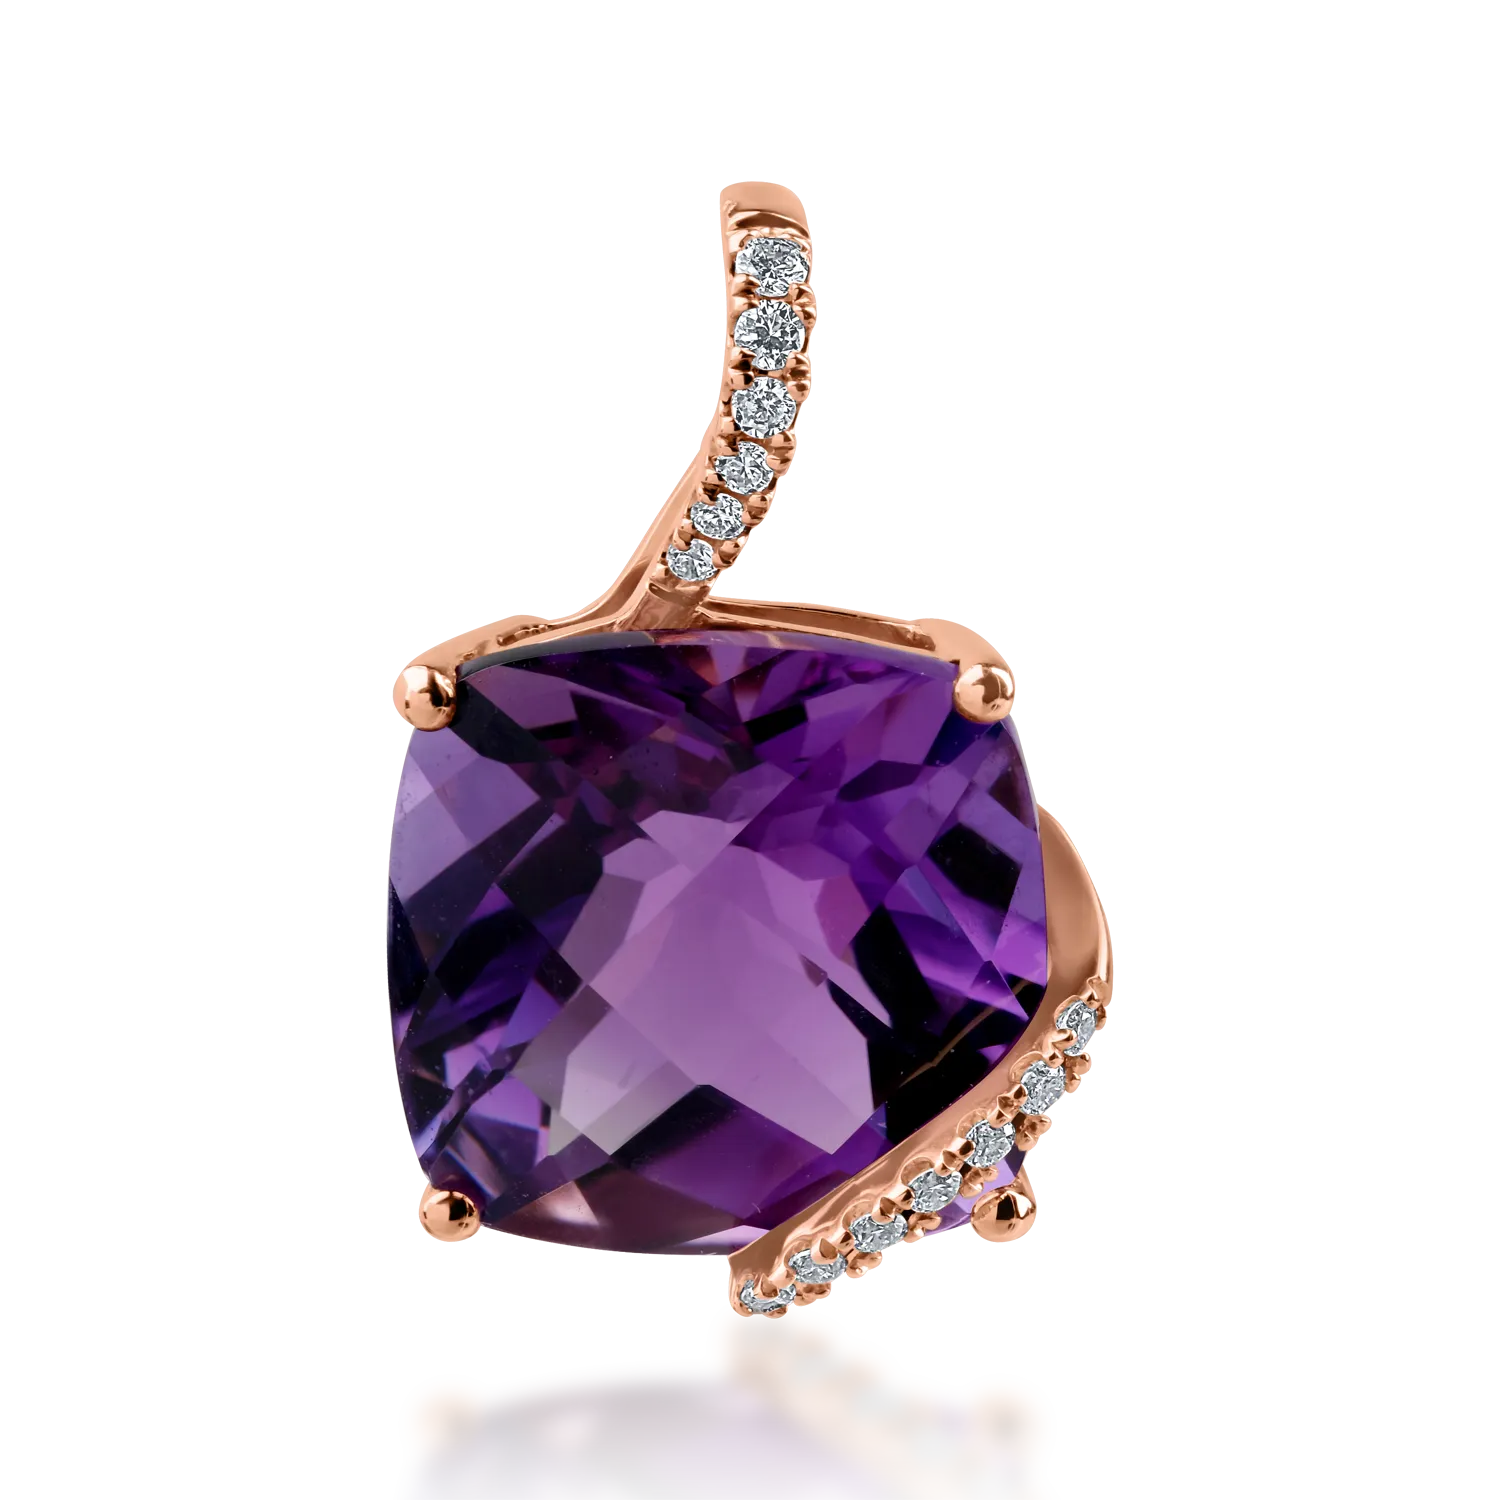 Rose gold pendant with 4.6ct amethyst and 0.06ct diamonds